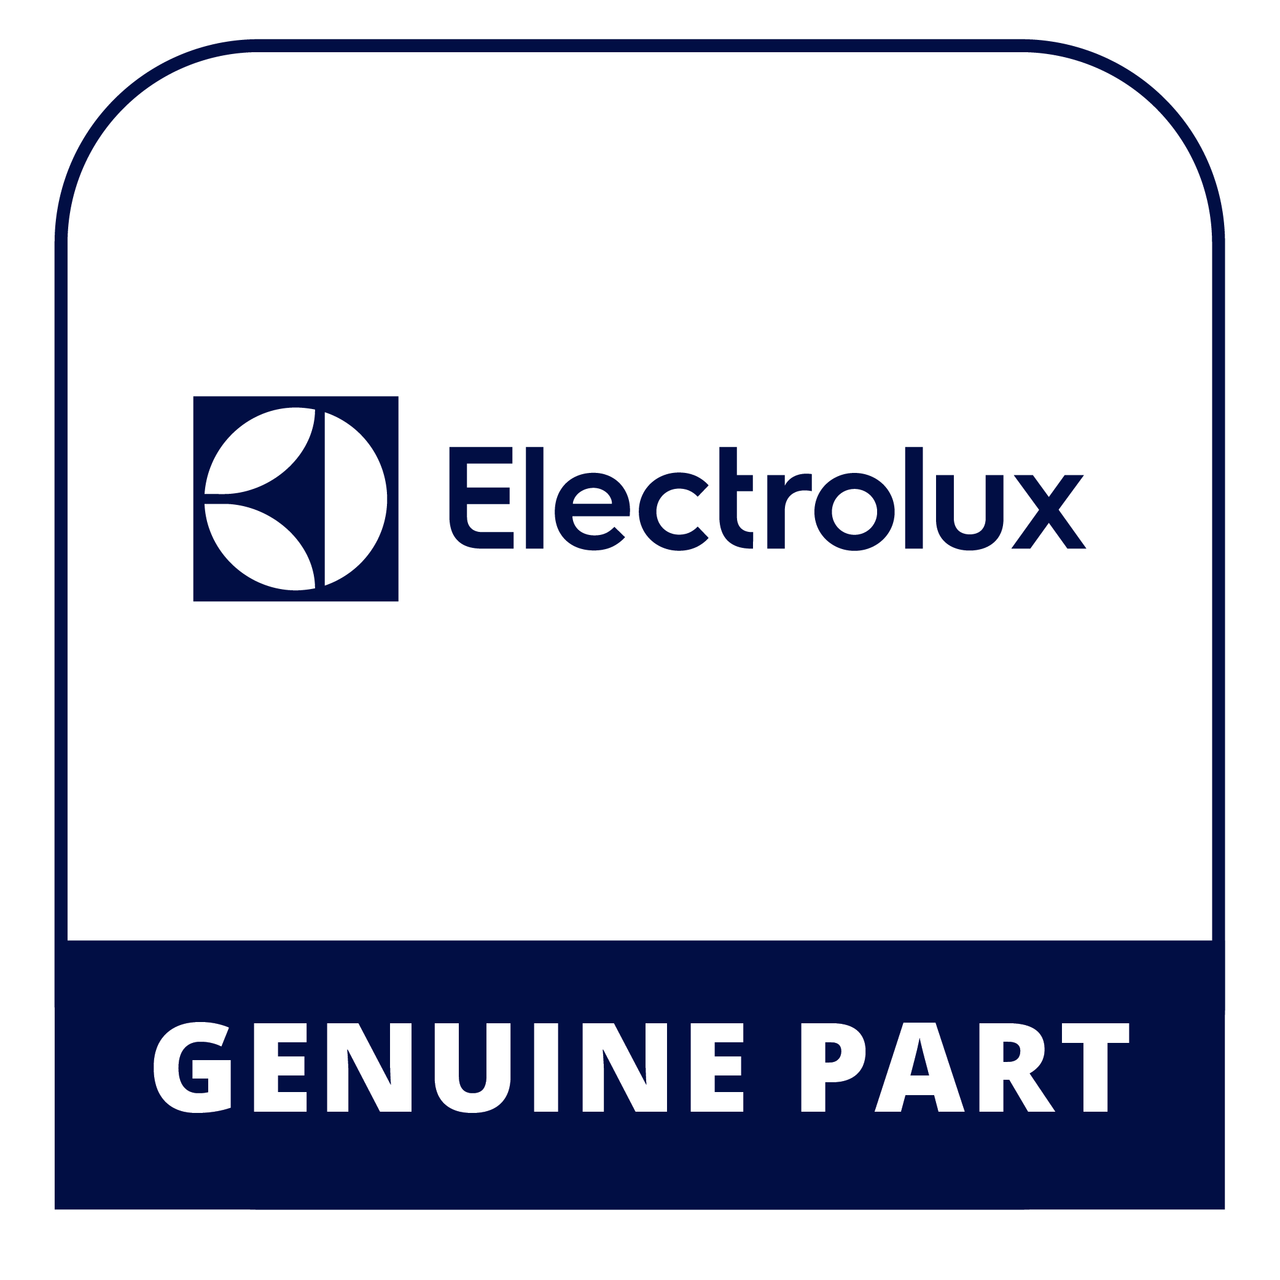 Frigidaire - Electrolux 318200767 Use & Care Guide - Genuine Electrolux Part